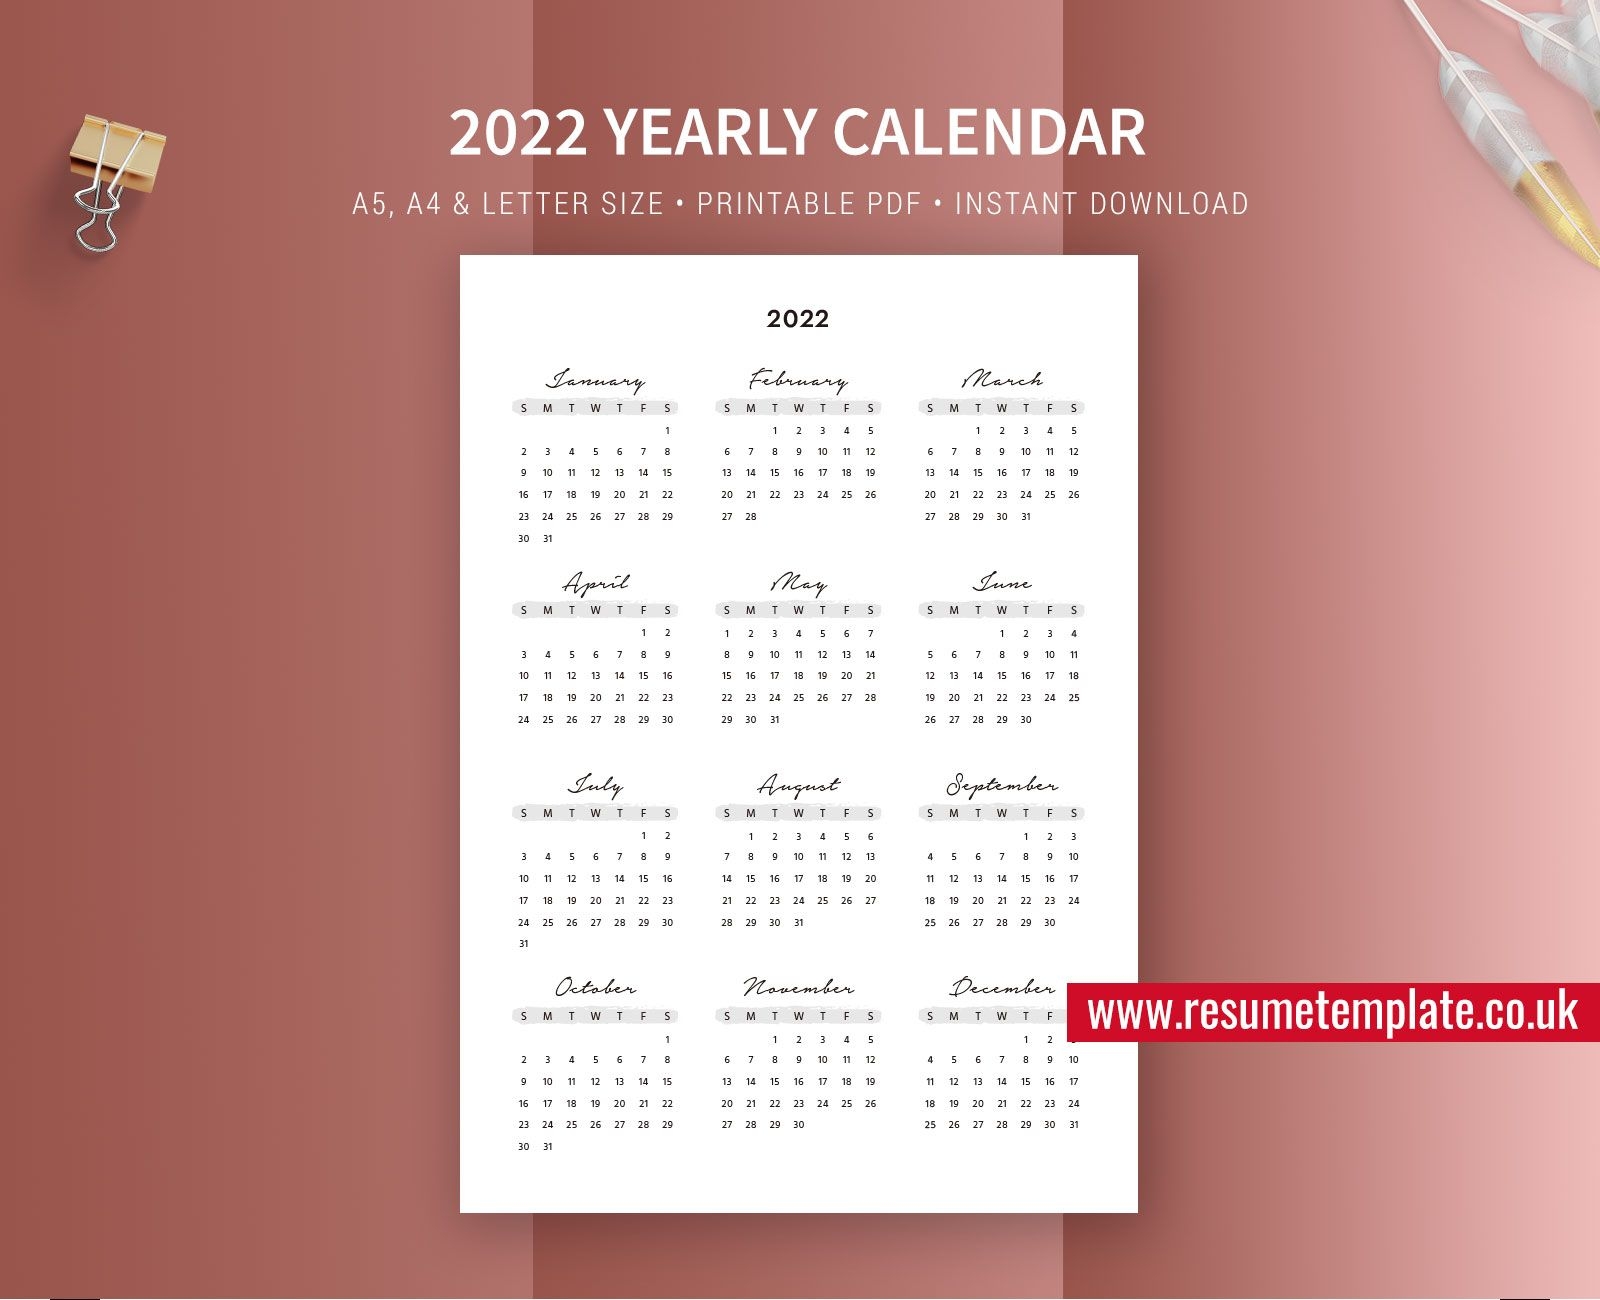 2021 2022 Yearly Calendar, Year At A Glance, Printable